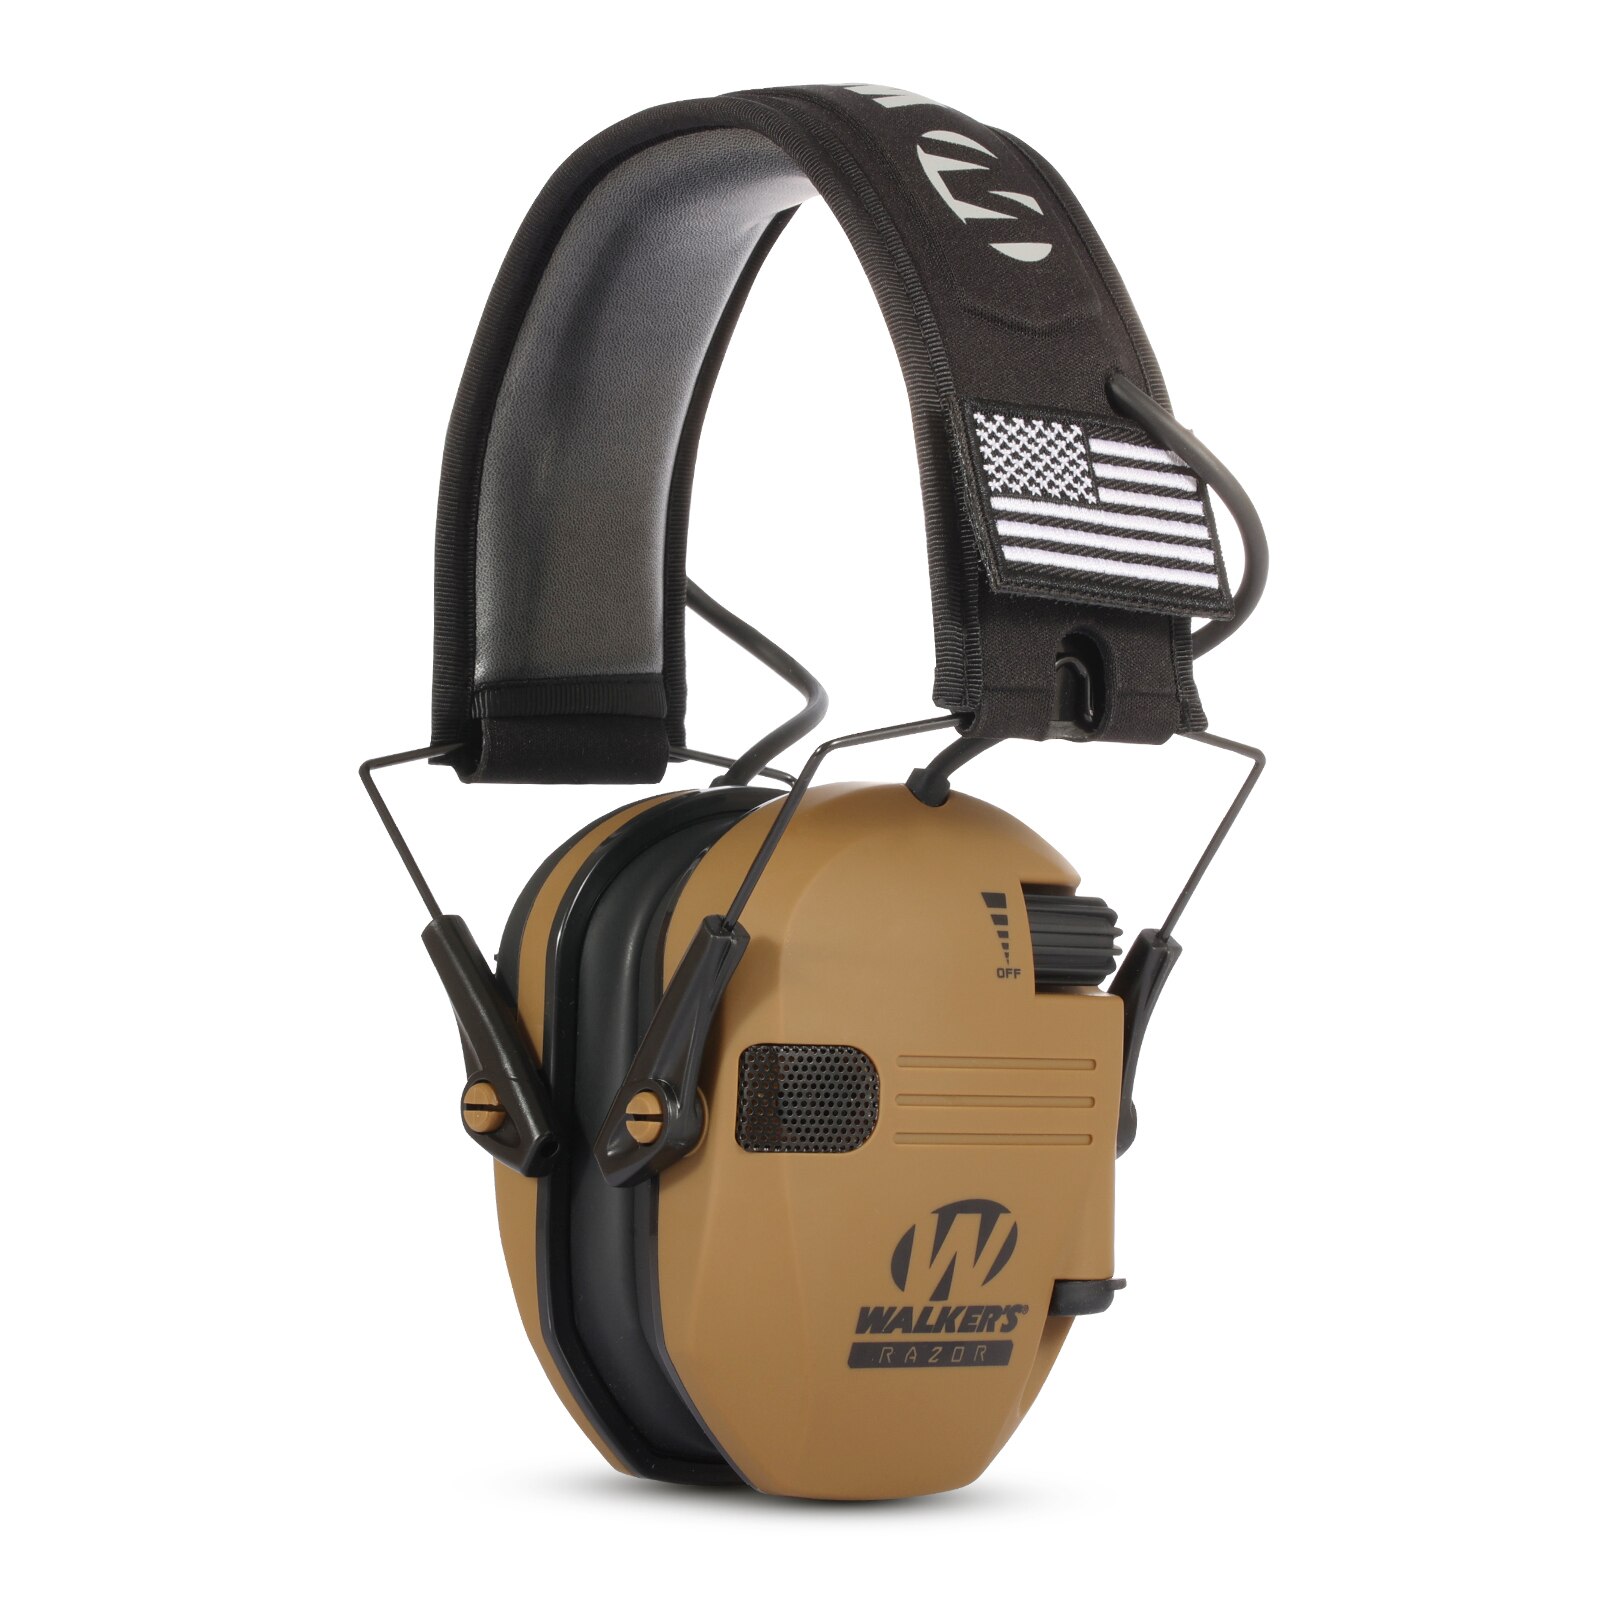 Electronic Hearing protection Noise Reduction for hunting